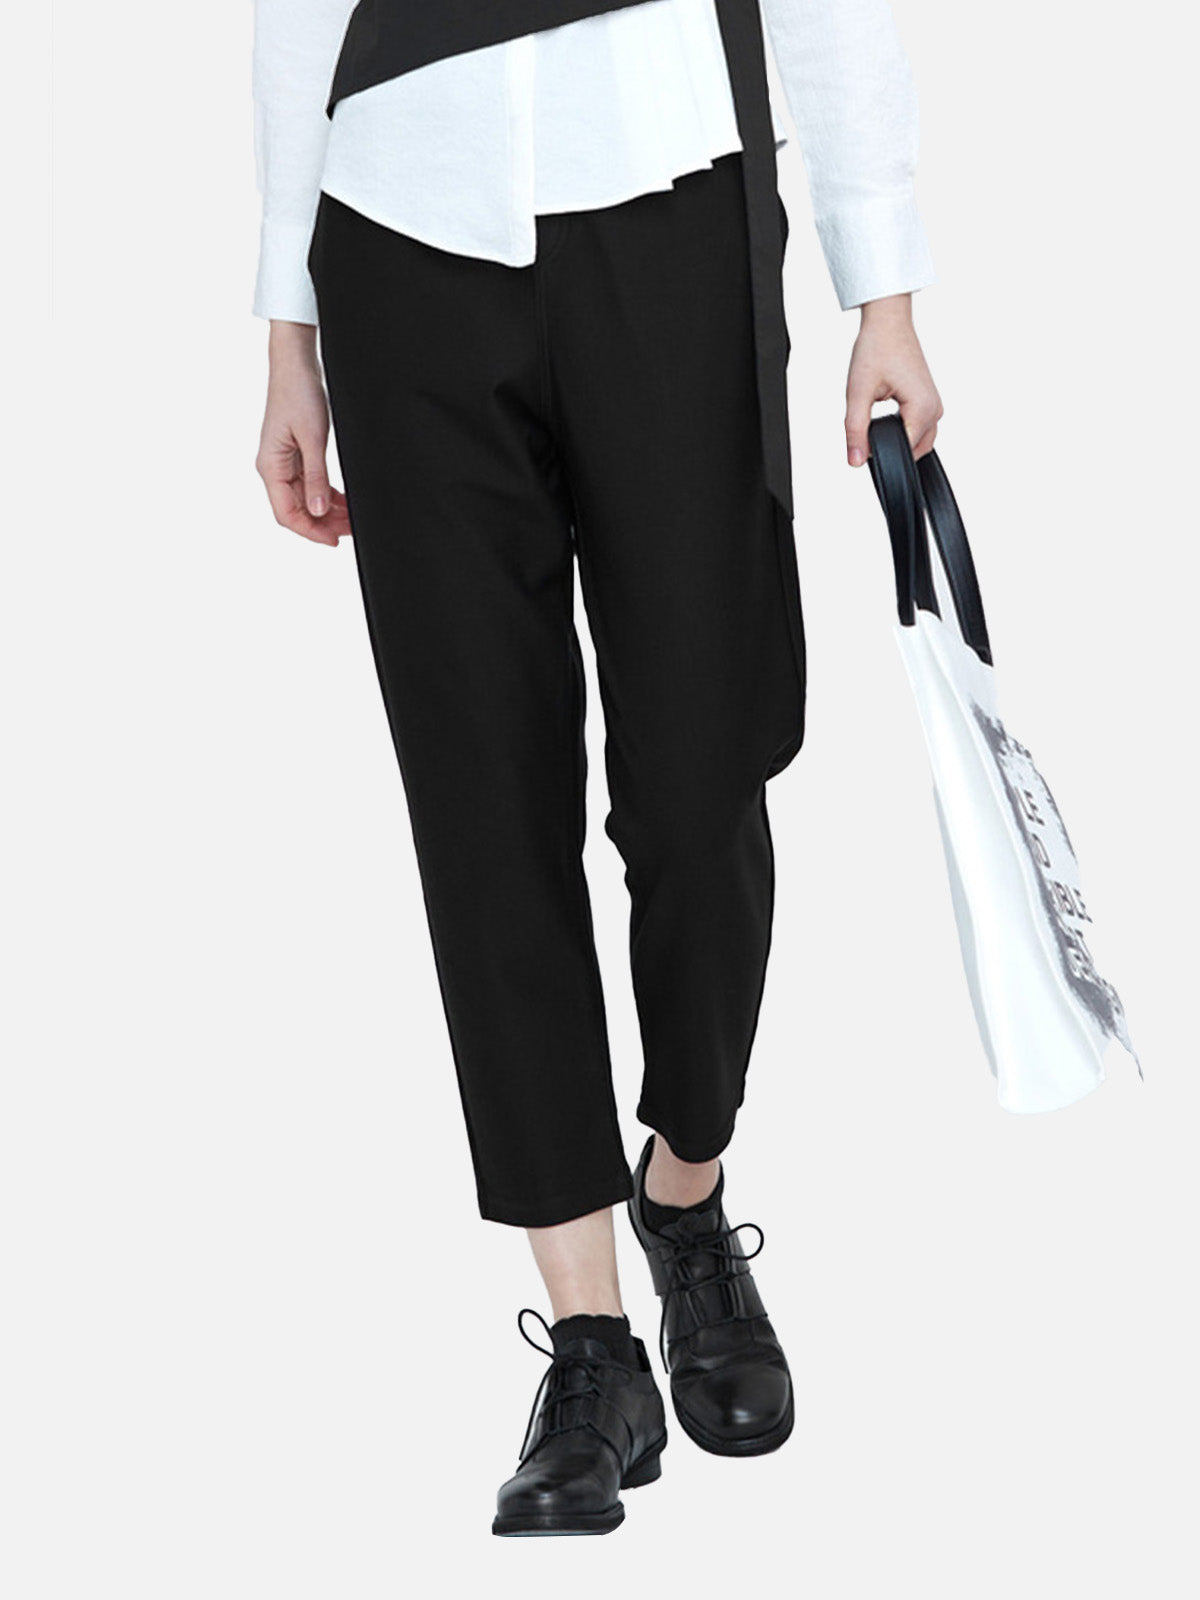 Cropped Black Carrot Pants With Pockets